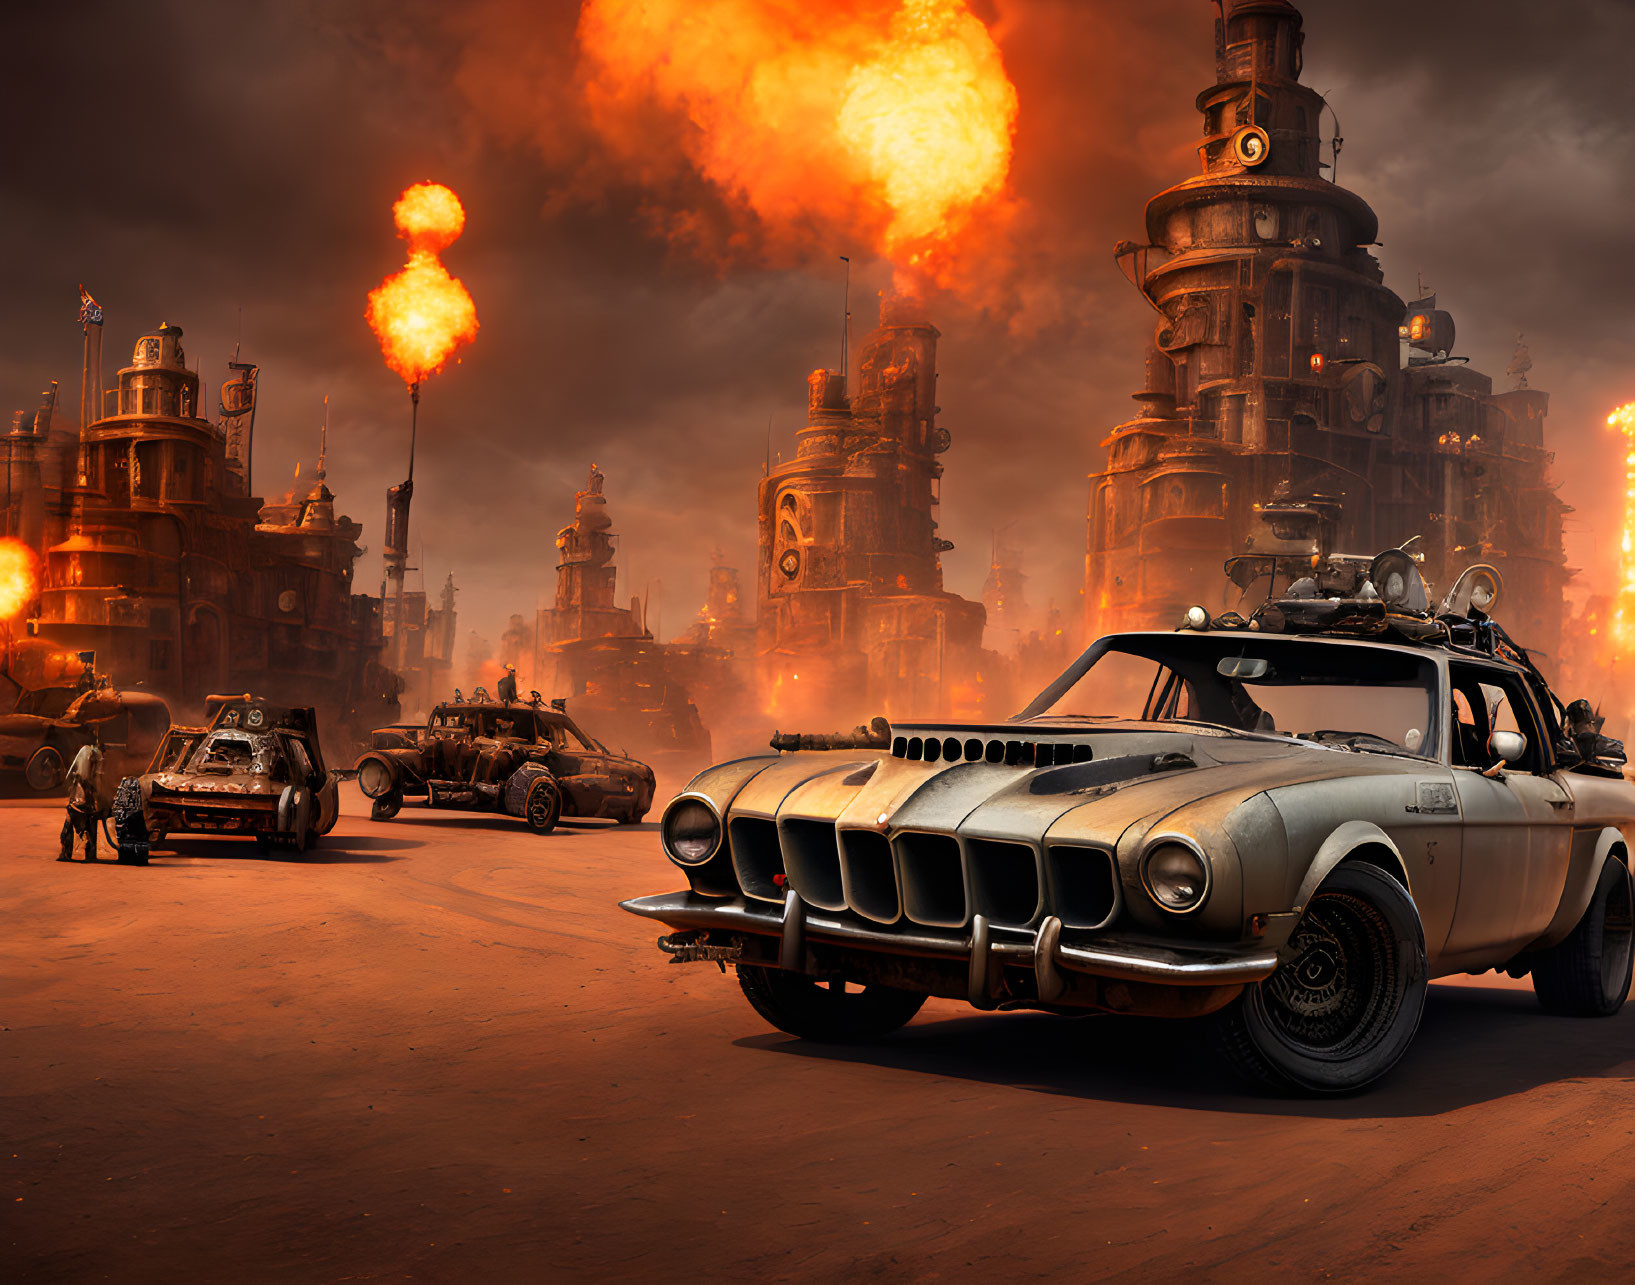 Modified car in dystopian scene with fiery explosions and industrial towers